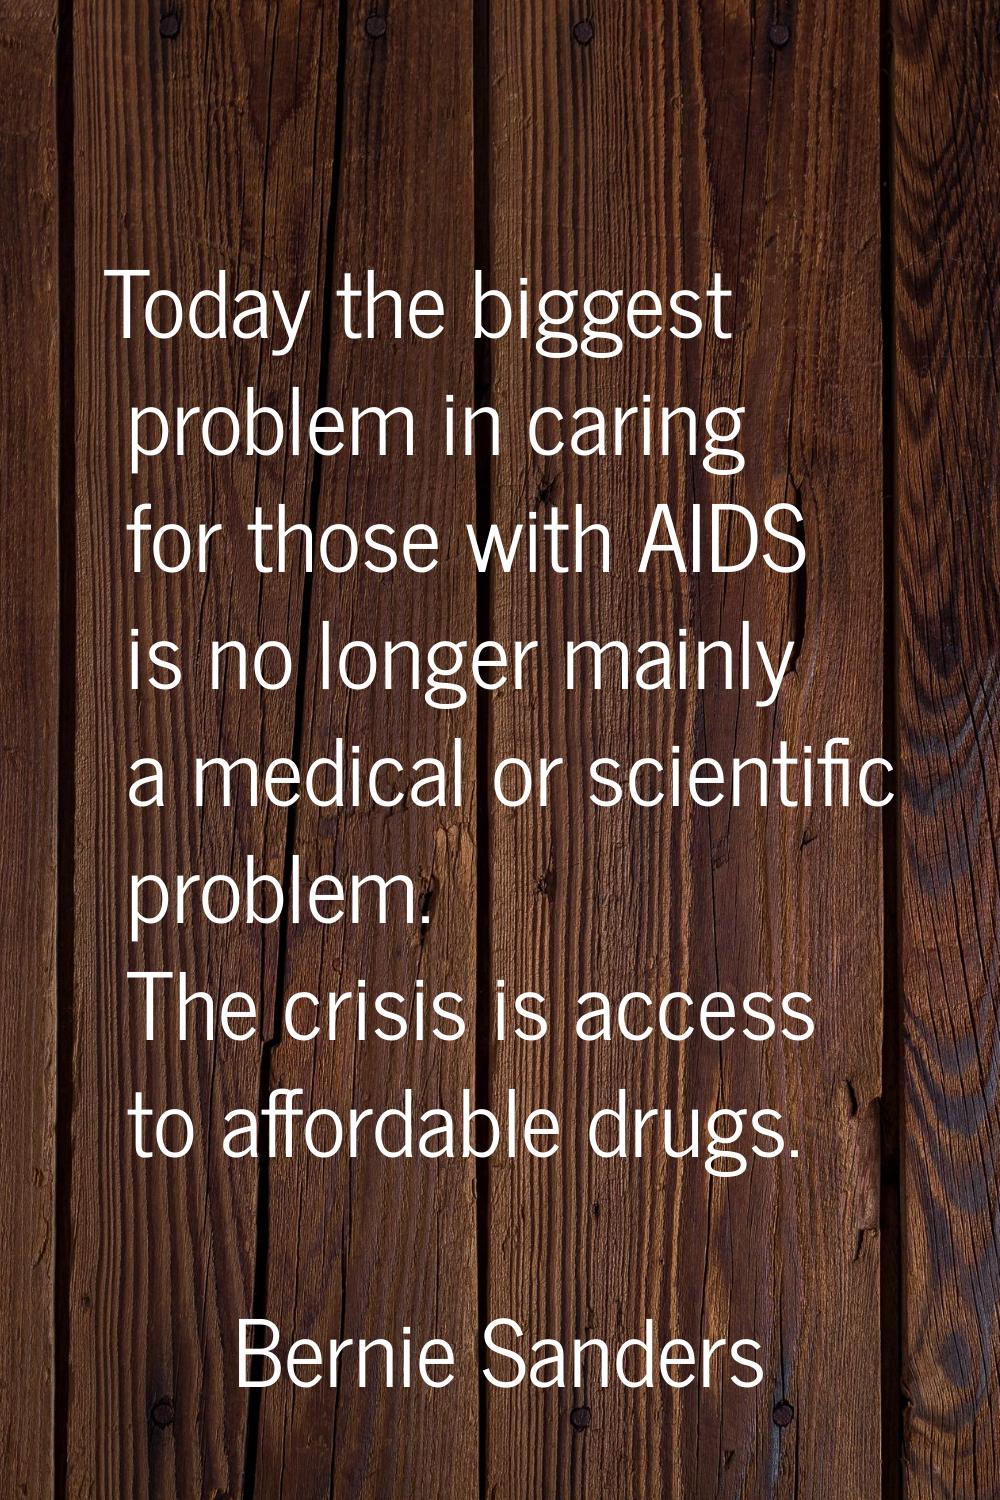 Today the biggest problem in caring for those with AIDS is no longer mainly a medical or scientific